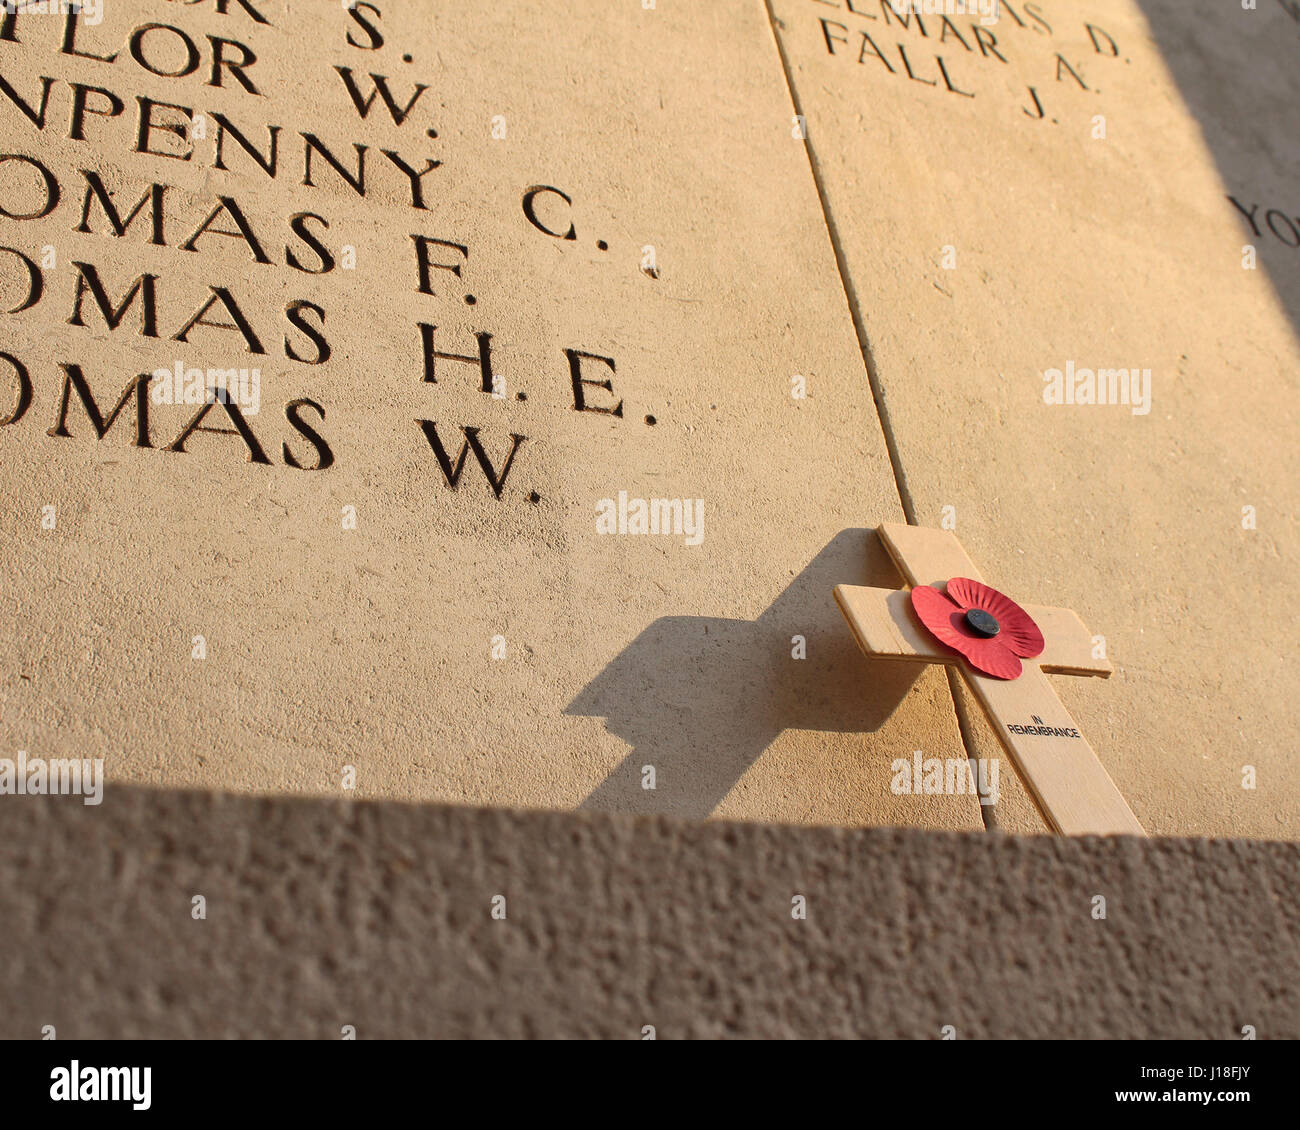 A poppy memorial cross left poignantly at the Menin Gate in Ypres, lit by a low evening sun. Stock Photo